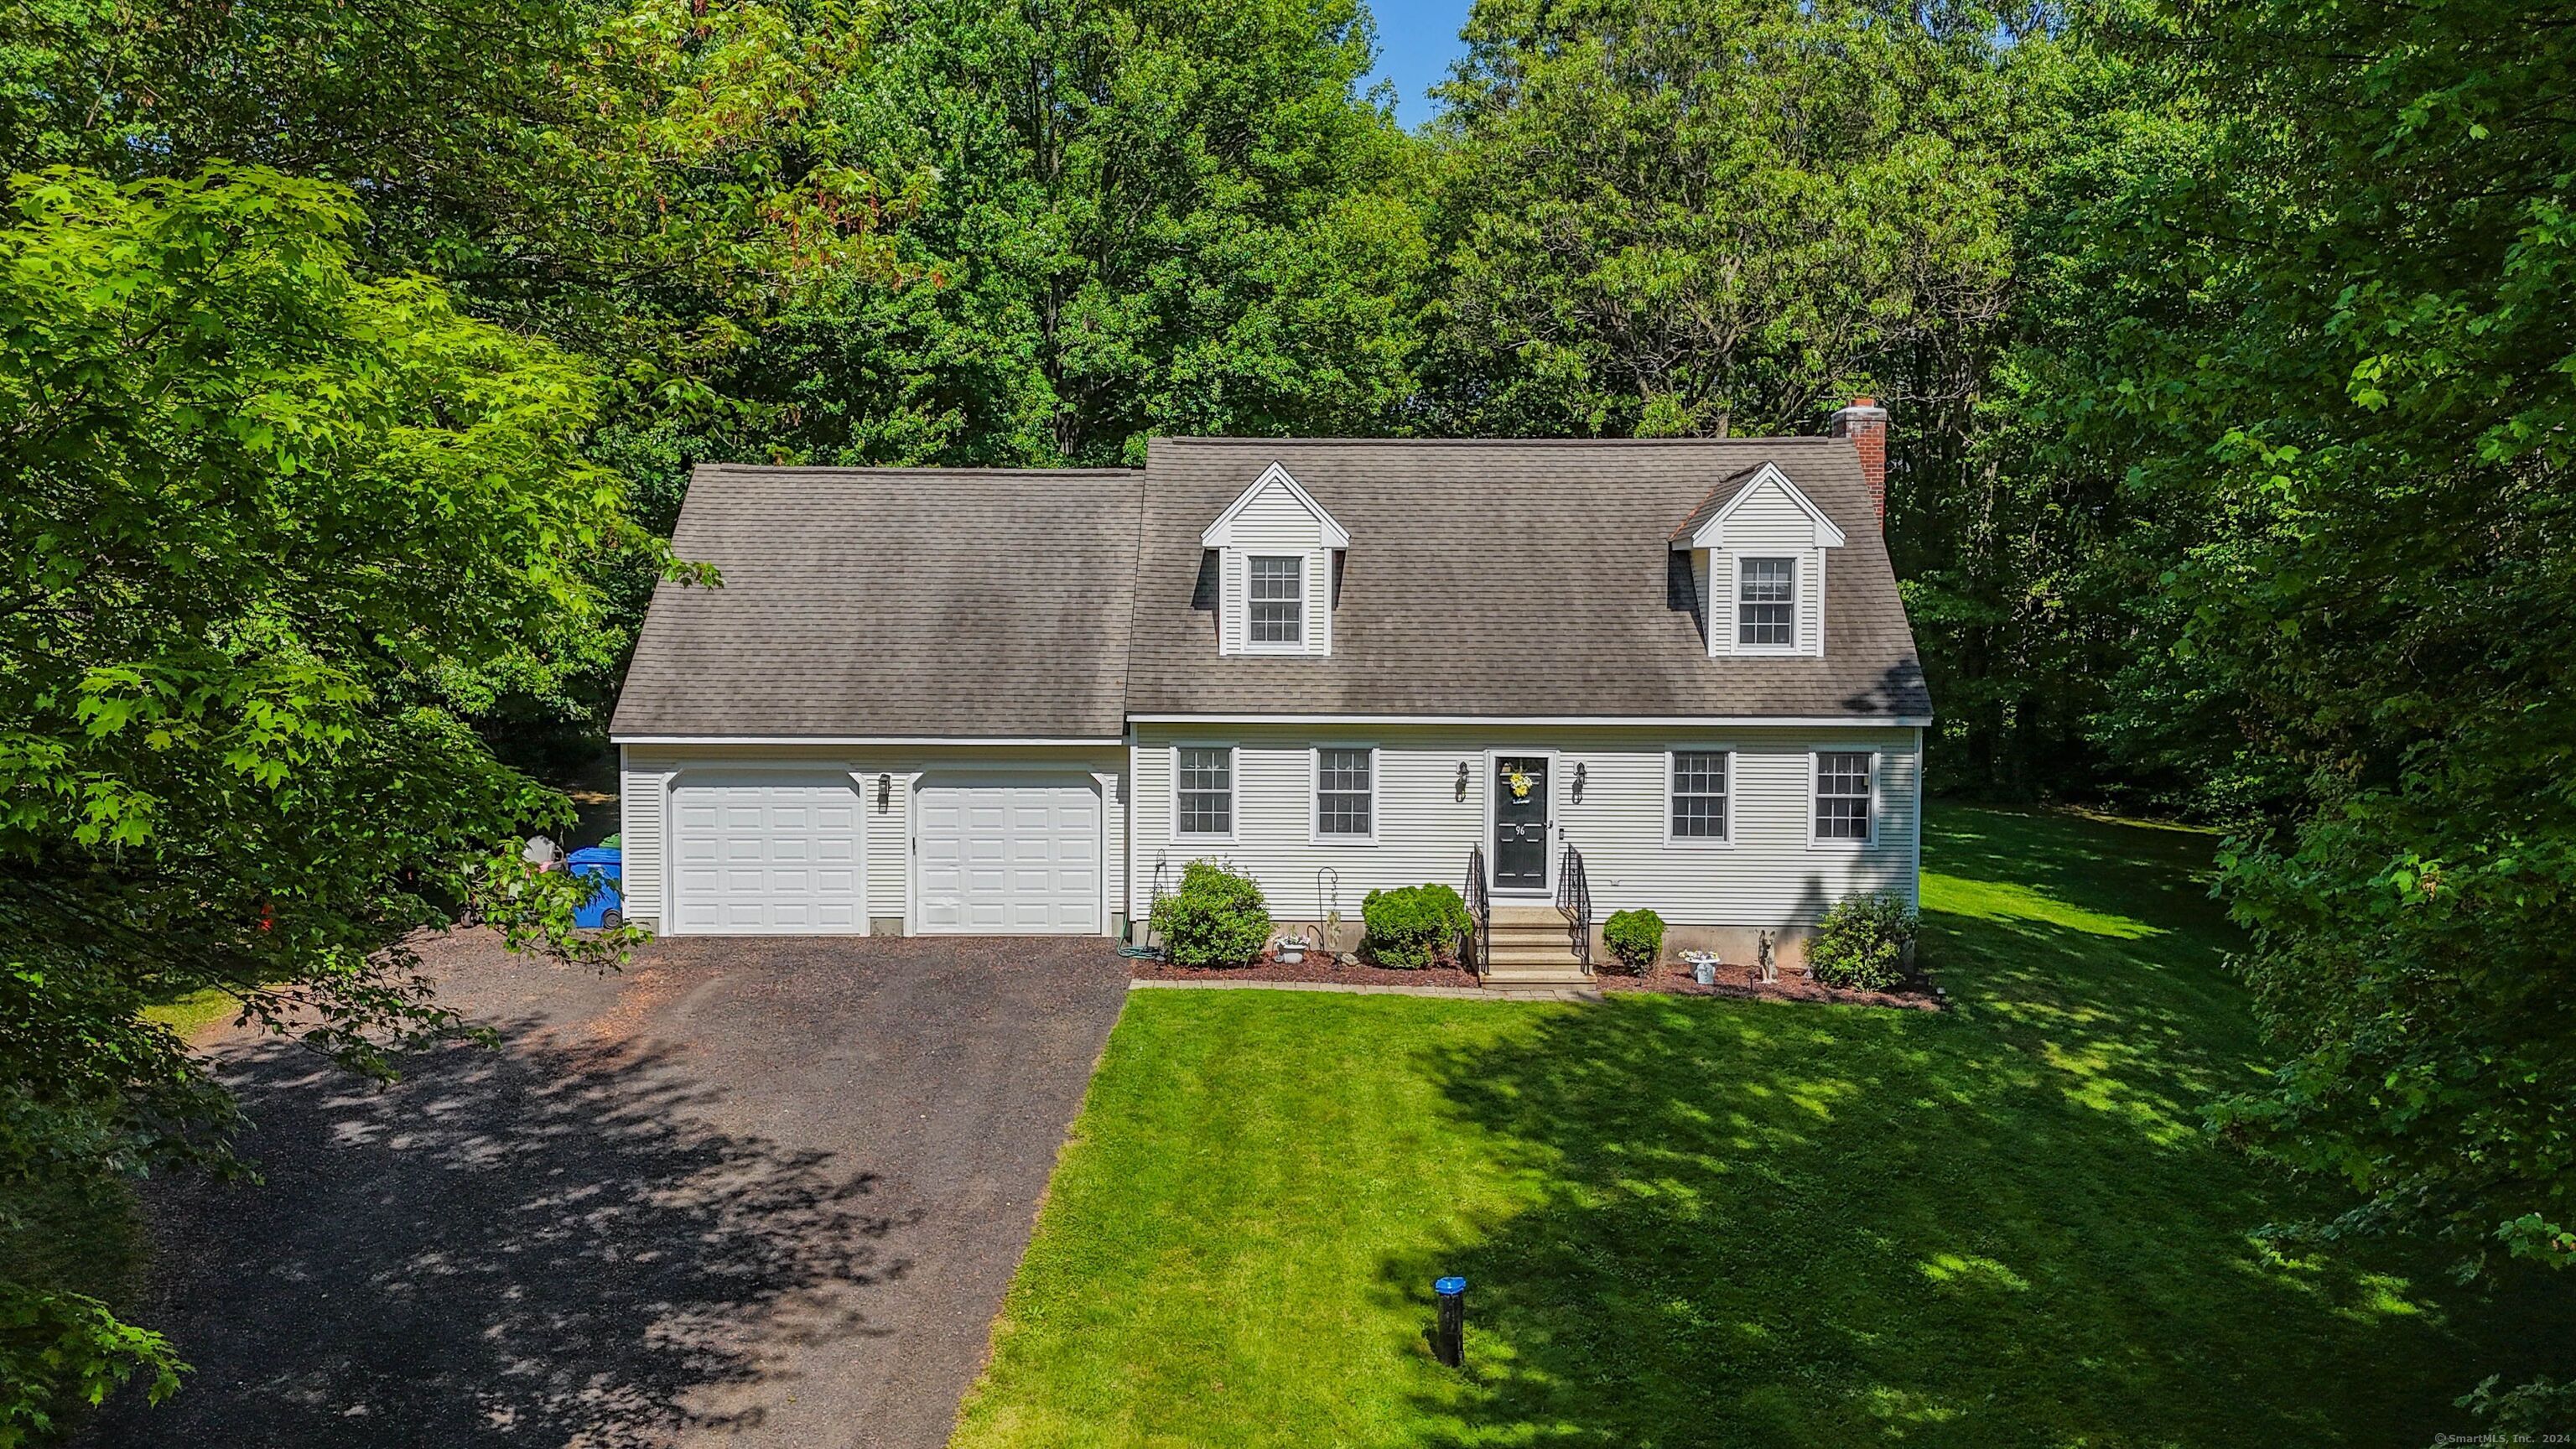 96 Nooks Hill Road, Cromwell, Connecticut - 3 Bedrooms  
3 Bathrooms  
7 Rooms - 